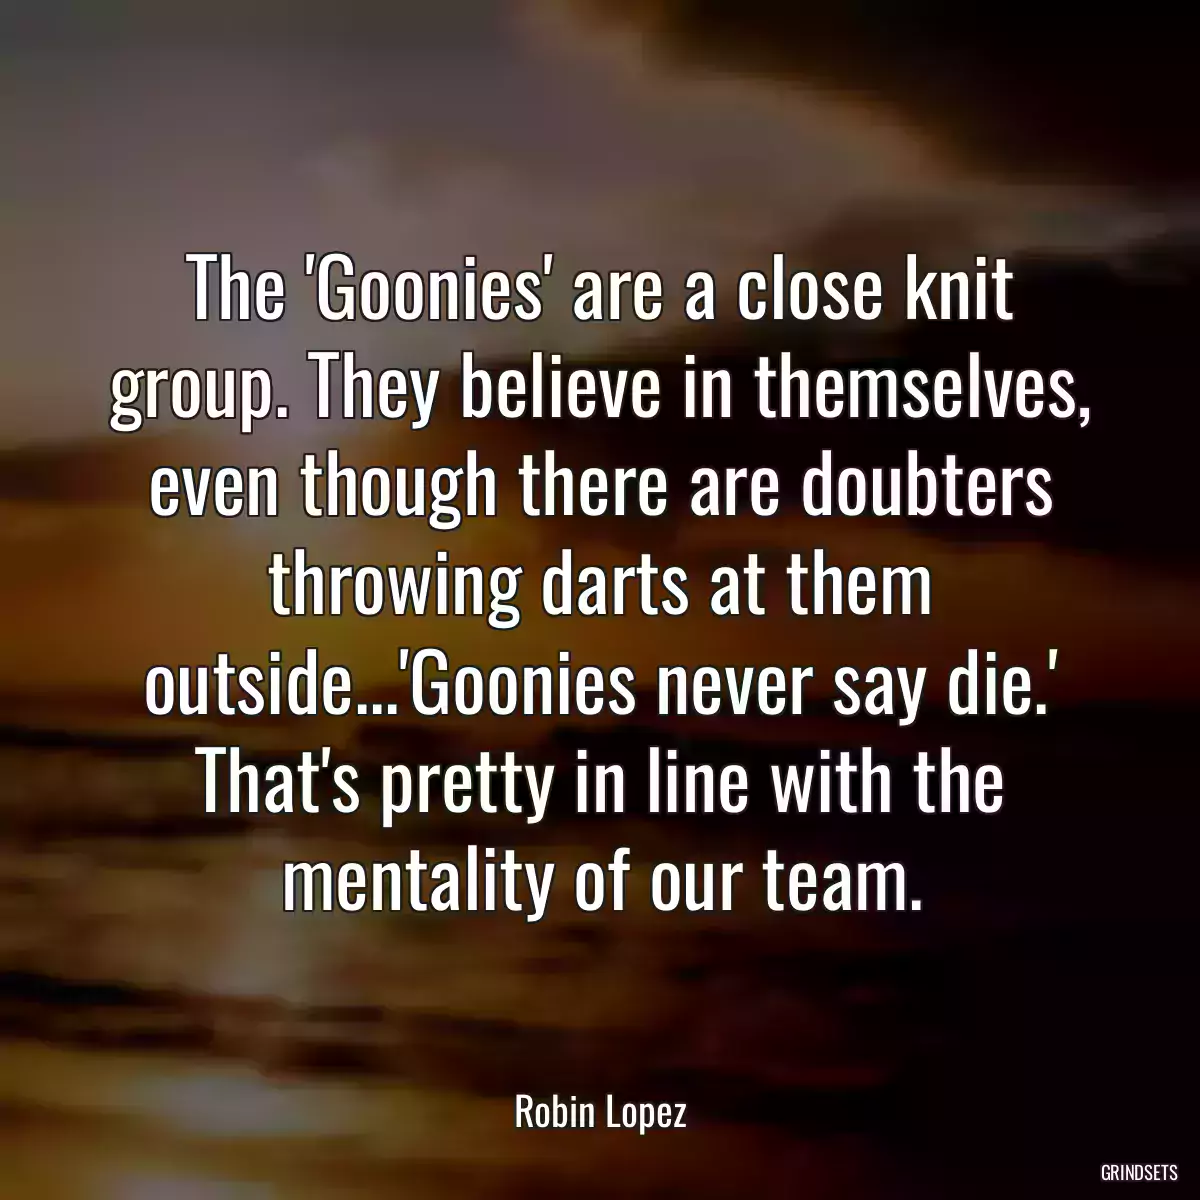 The \'Goonies\' are a close knit group. They believe in themselves, even though there are doubters throwing darts at them outside...\'Goonies never say die.\' That\'s pretty in line with the mentality of our team.